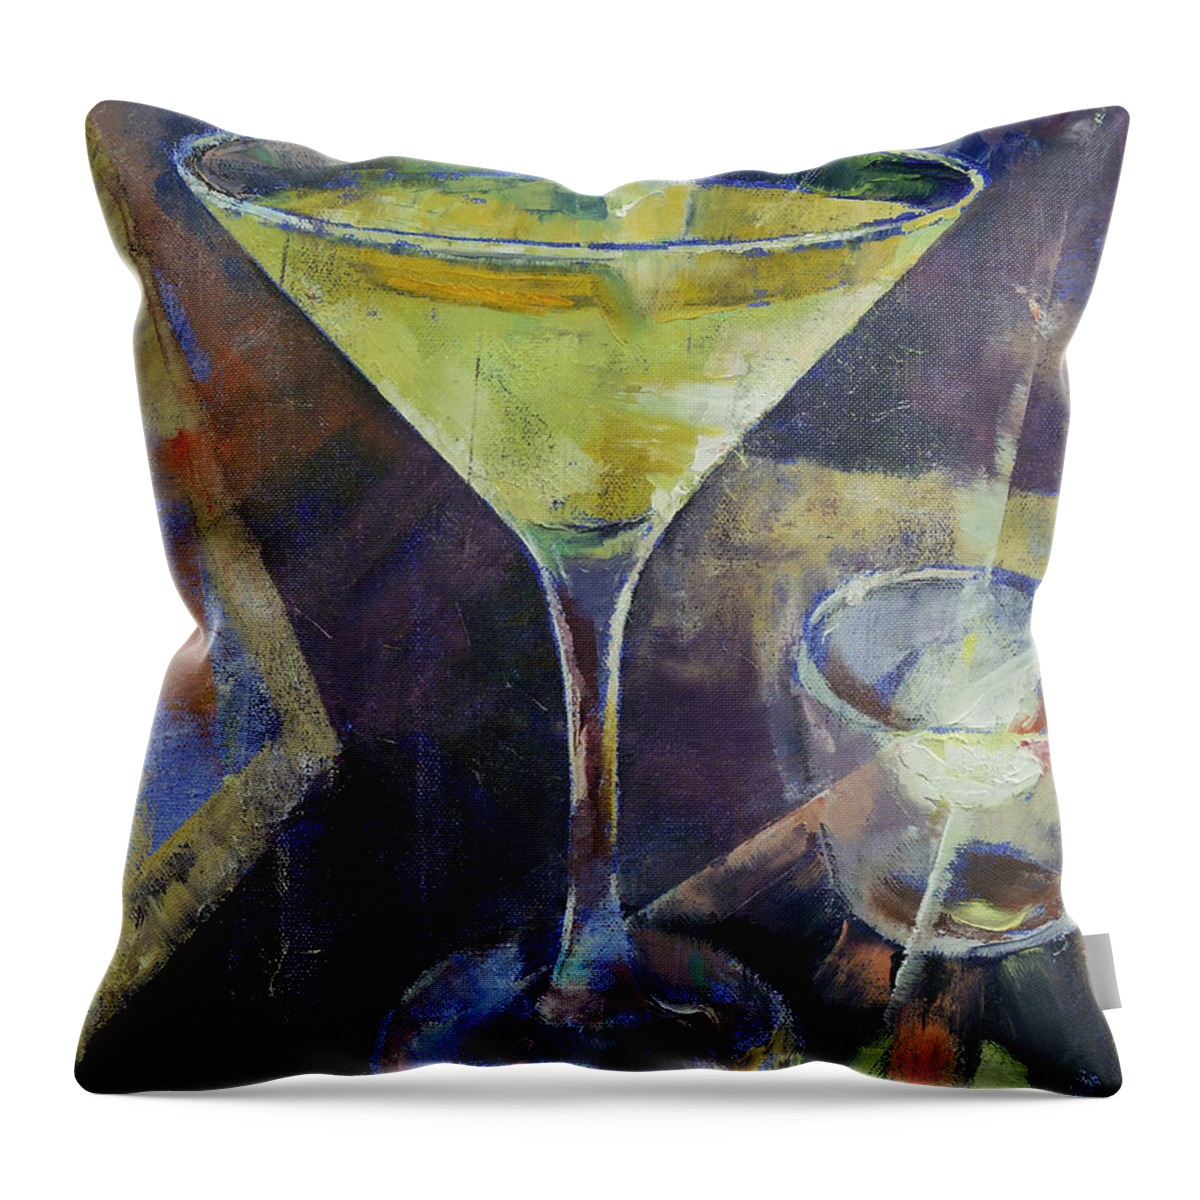 Appletini Throw Pillow featuring the painting Appletini by Michael Creese